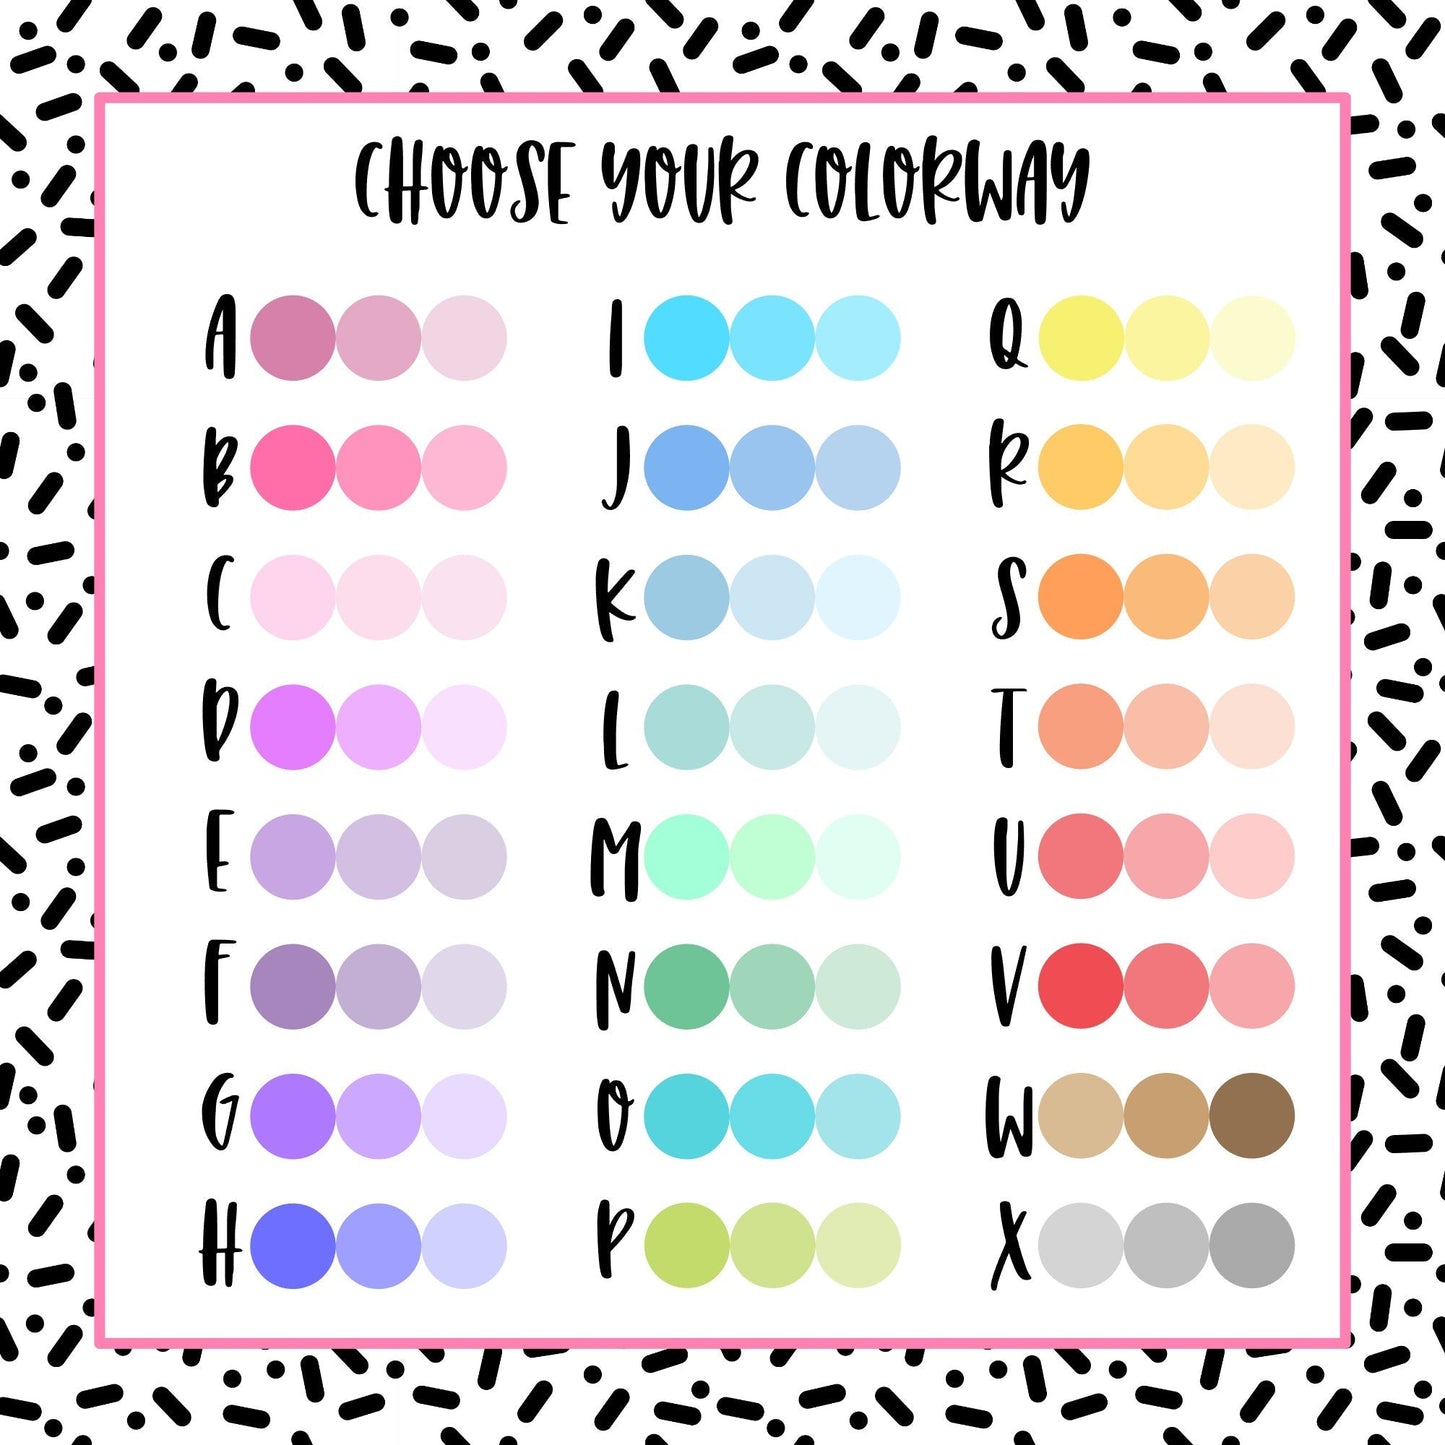 Multicolor Shadowed Boxes - 24 color options